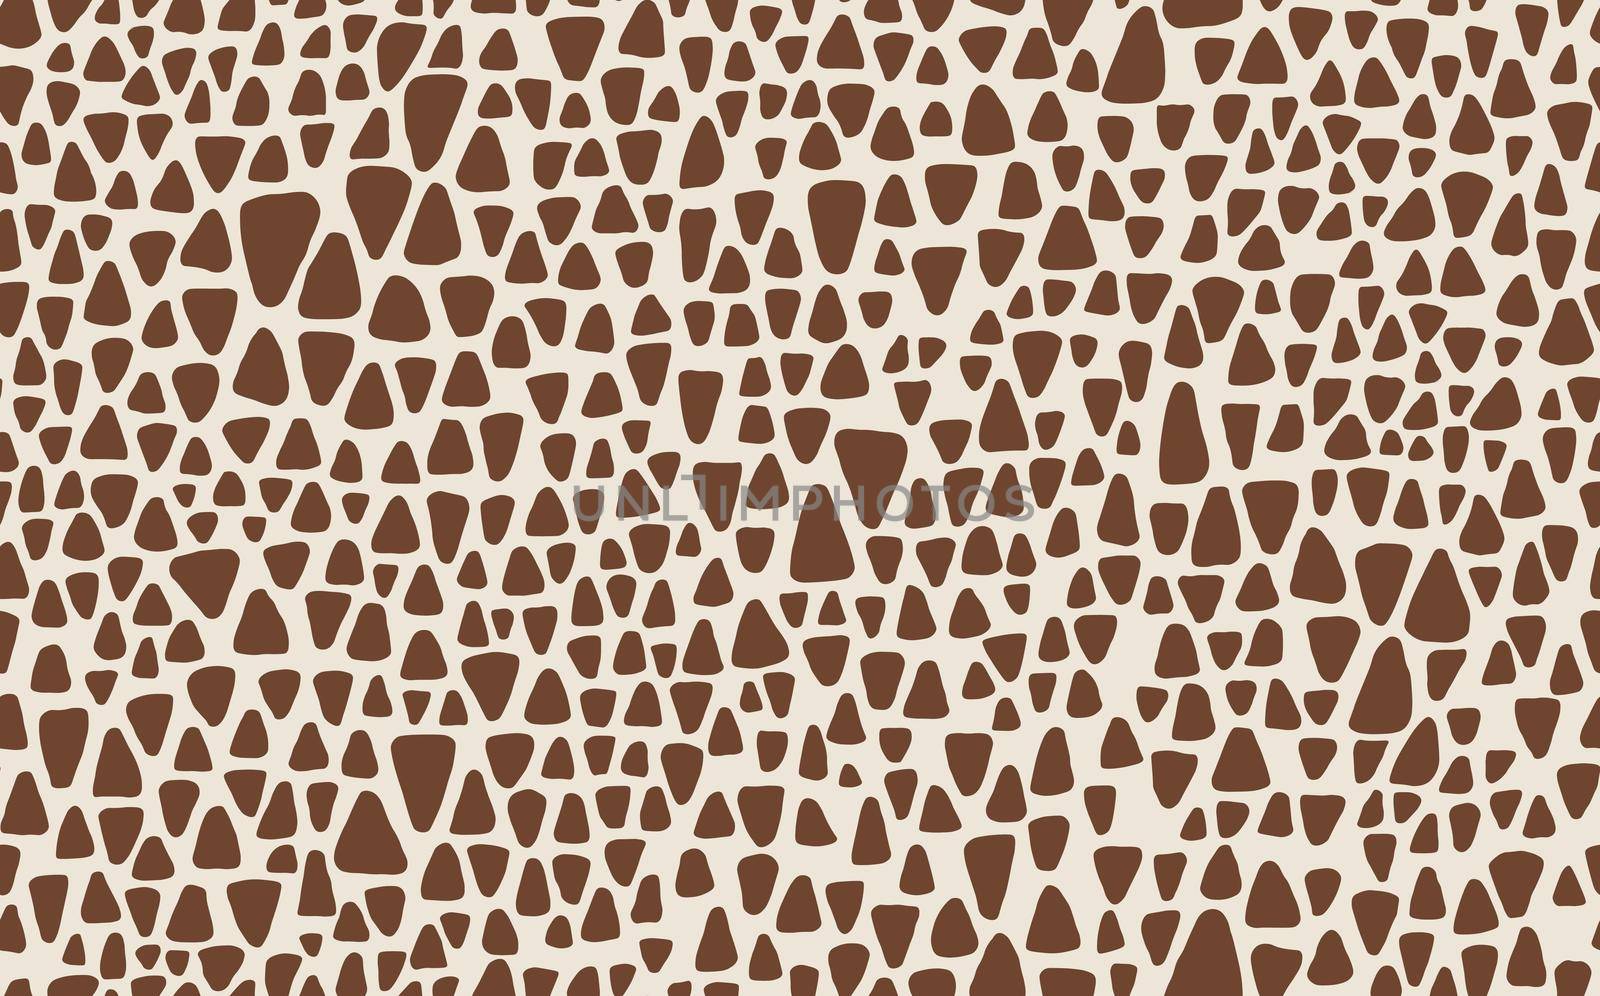 Abstract modern giraffe seamless pattern. Animals trendy background. Colorful decorative vector stock illustration for print, card, postcard, fabric, textile. Modern ornament of stylized skin by allaku